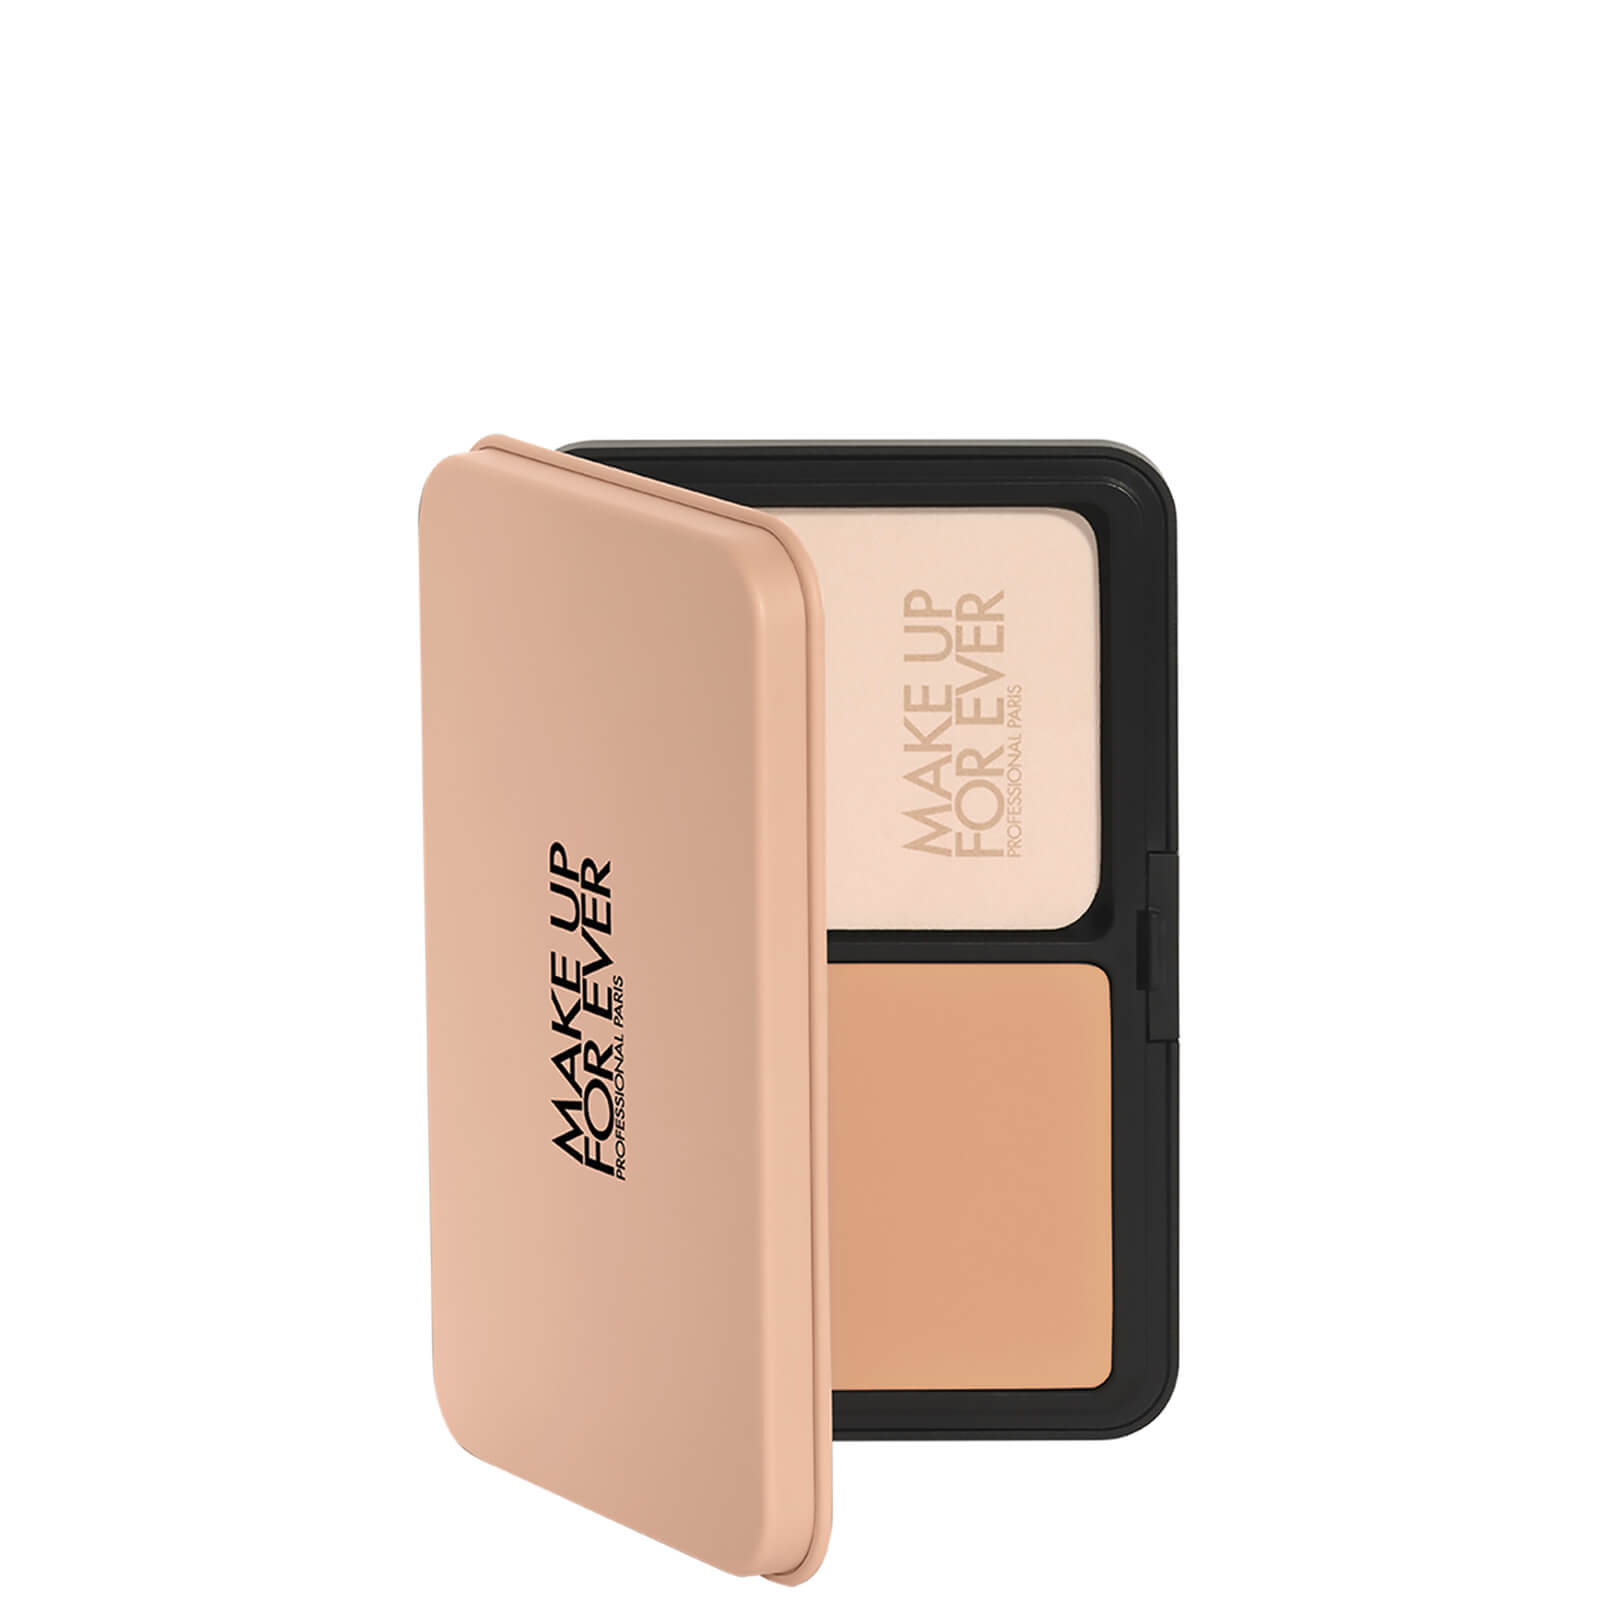 MAKE UP FOR EVER HD SKIN Powder Foundation 11g (Various Shades) - 2Y36